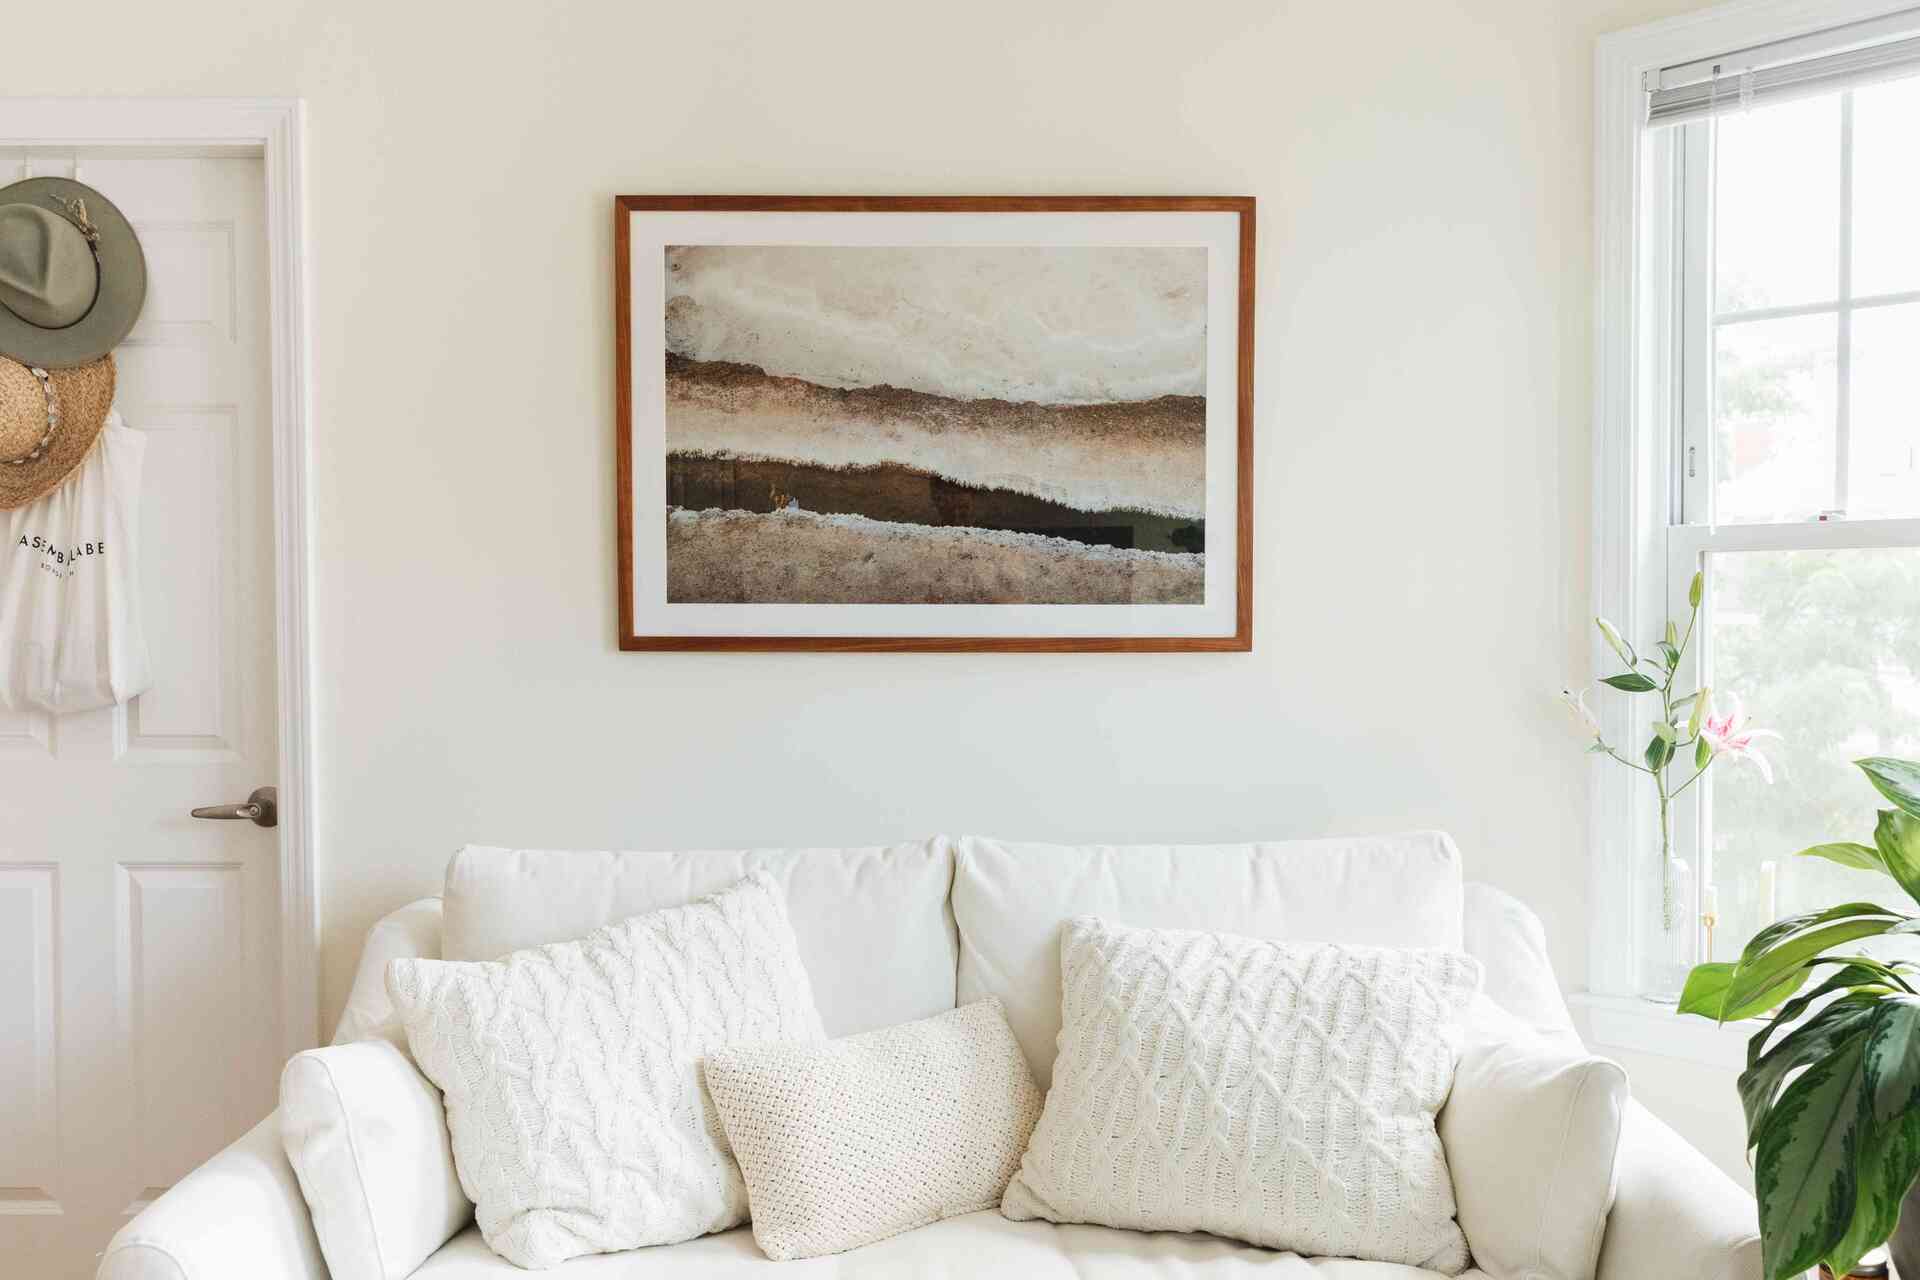 How High To Hang Pictures From Interior Design Experts